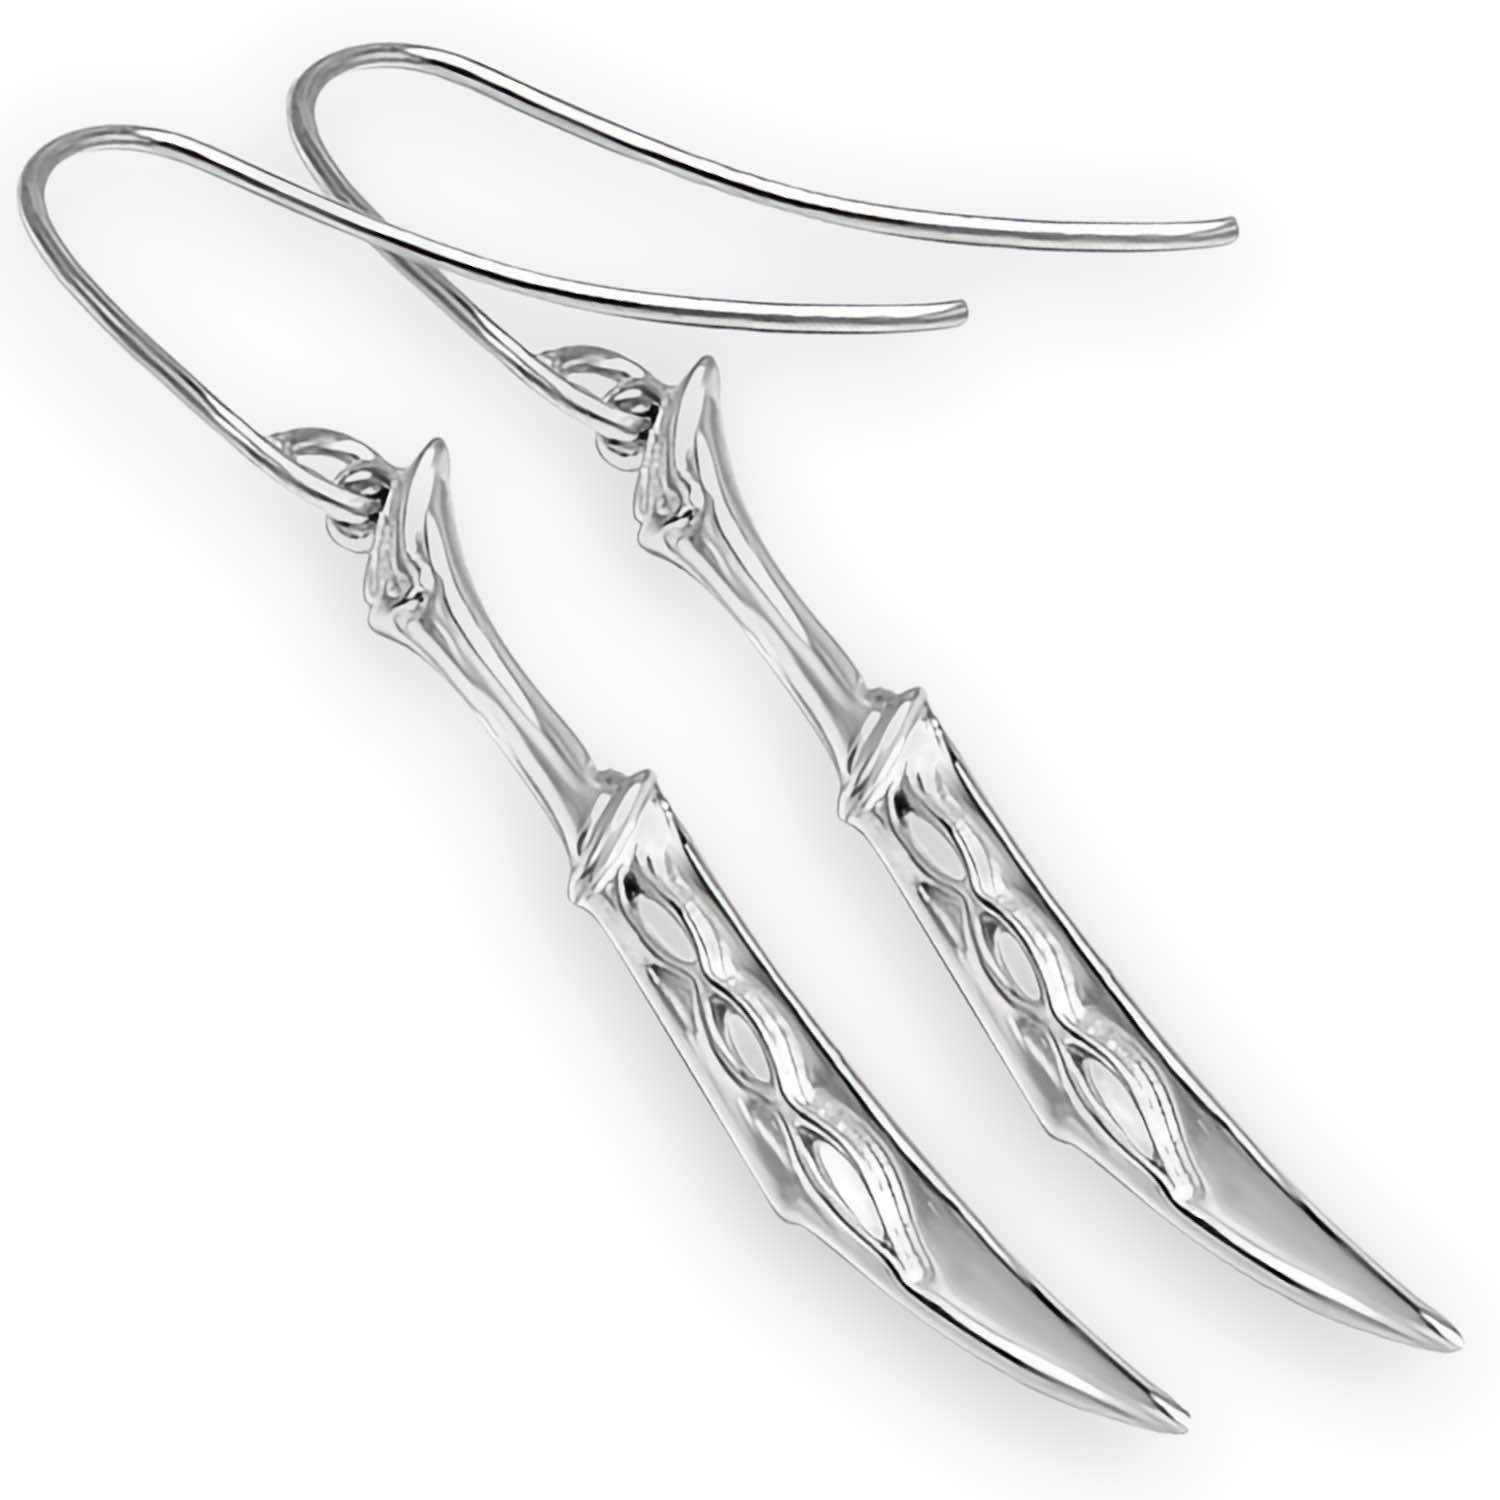 These Tauriel dagger earrings are crafted from silver and feature the iconic weapon of the Elven warrior, Tauriel, from The Hobbit trilogy. A must-have for fans of J.R.R. Tolkien's beloved fantasy series.